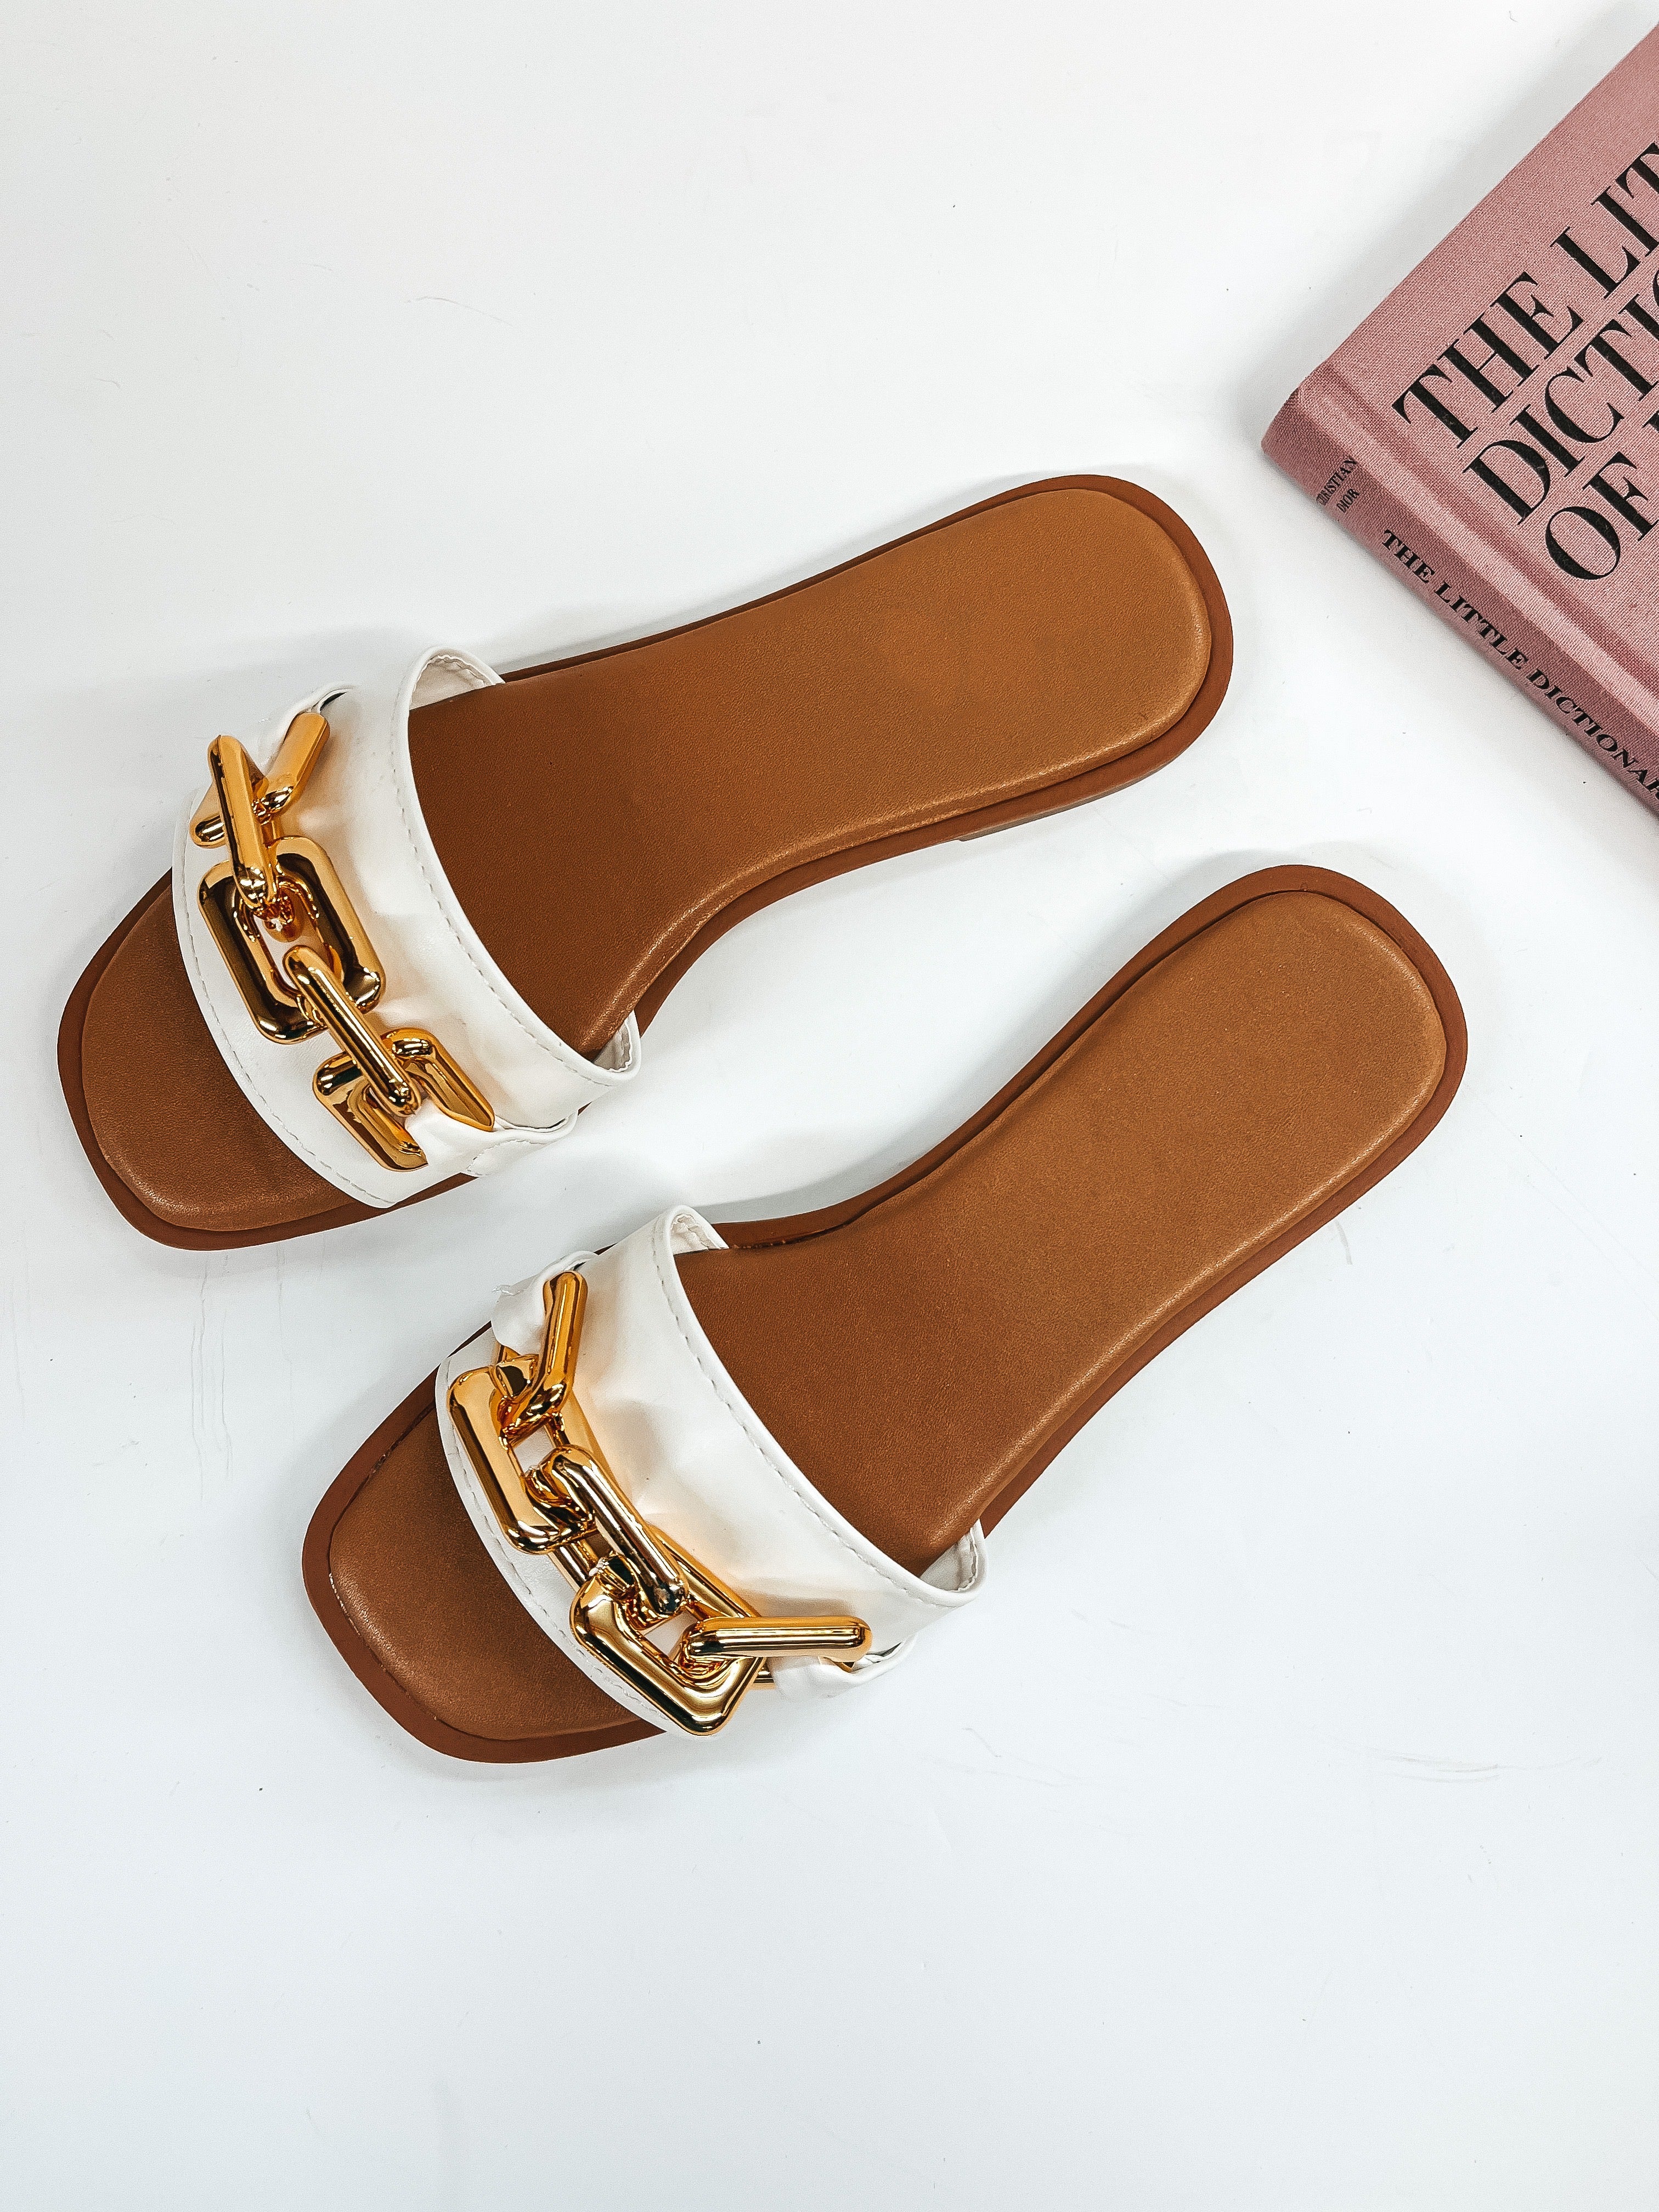 Resort Vibes Slide On Sandals with Gold Chain in White - Giddy Up Glamour Boutique